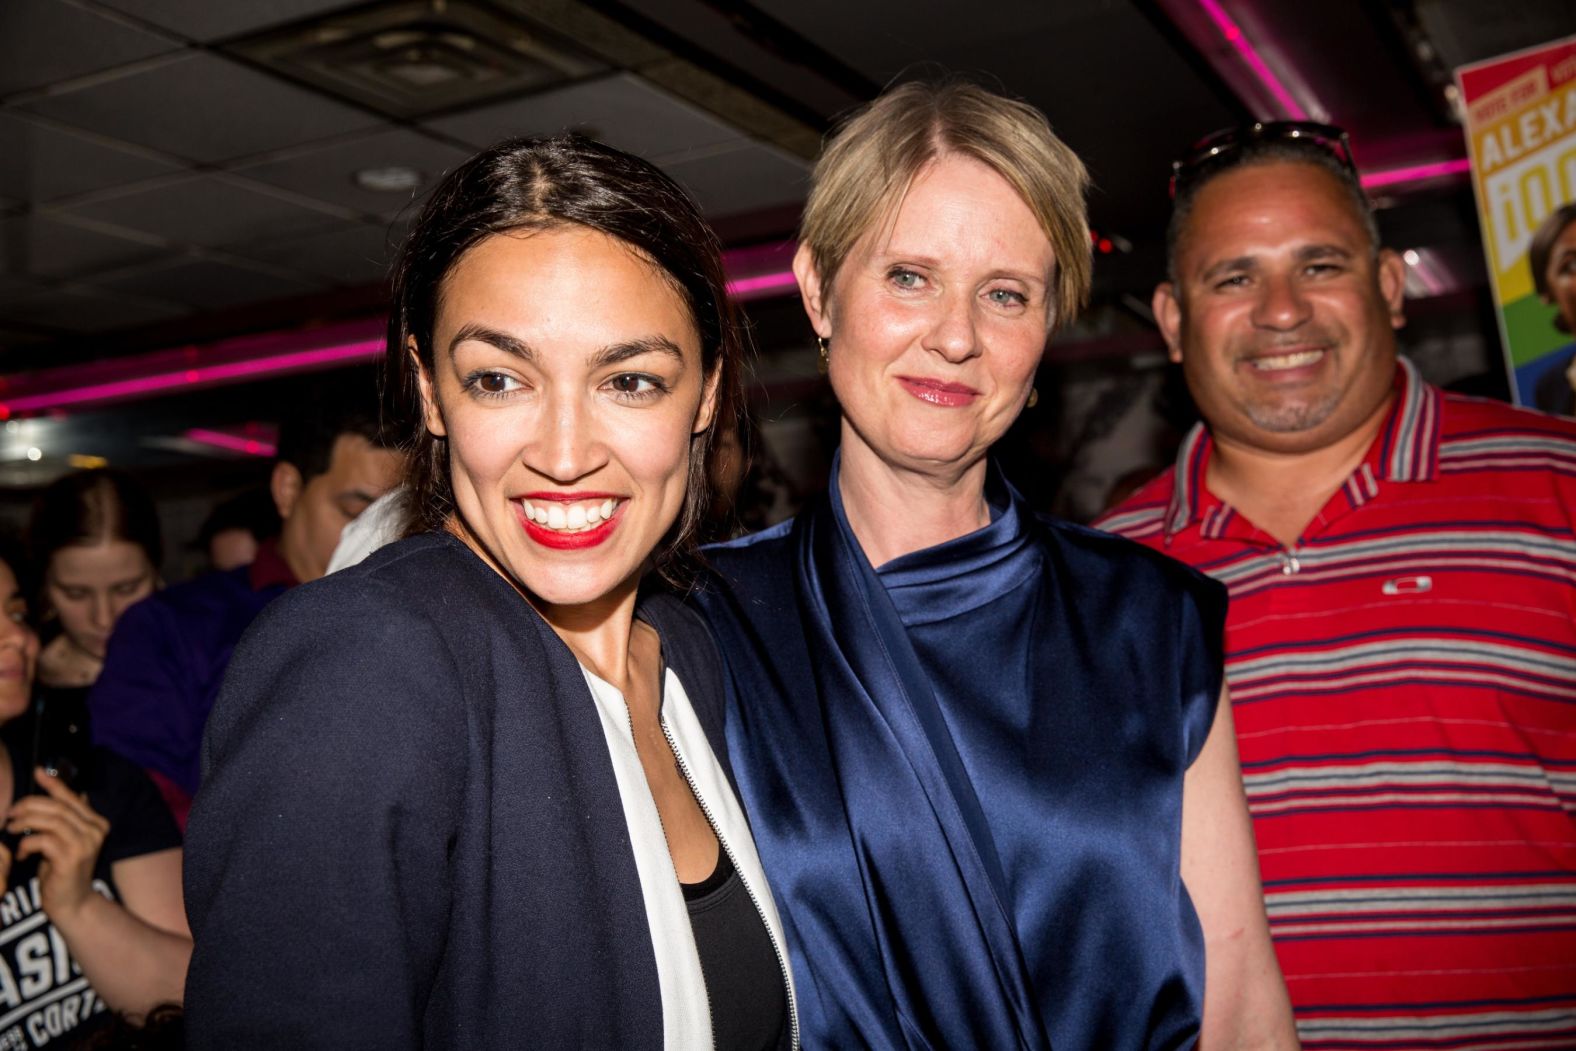 Ocasio-Cortez is joined at her victory party by New York gubernatorial candidate Cynthia Nixon.